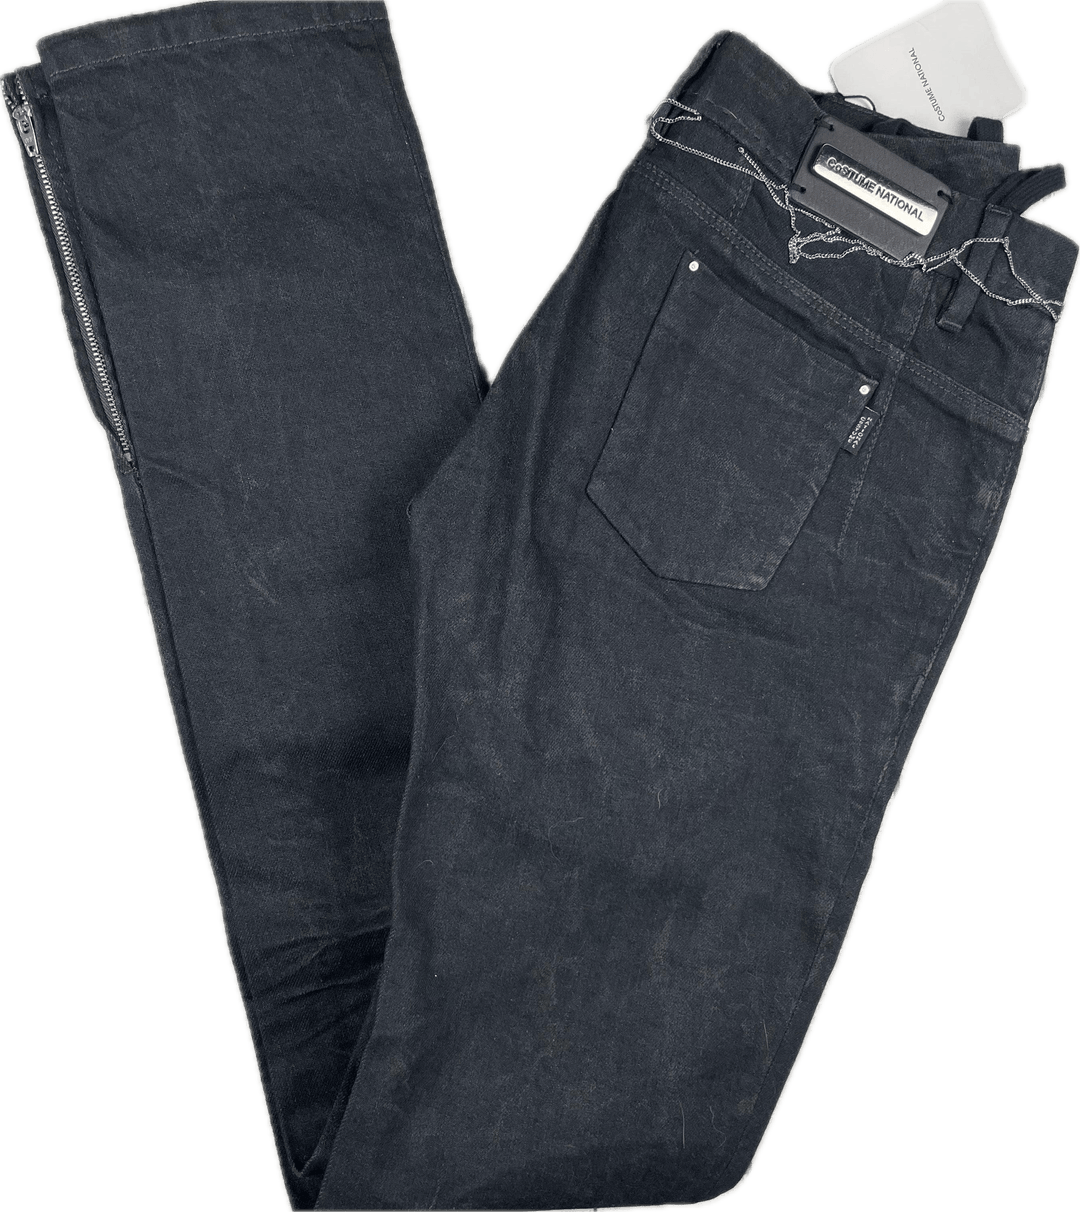 NWT- CNC Costume National Chain Waist Slim Fit Jeans - Size 27 - Jean Pool